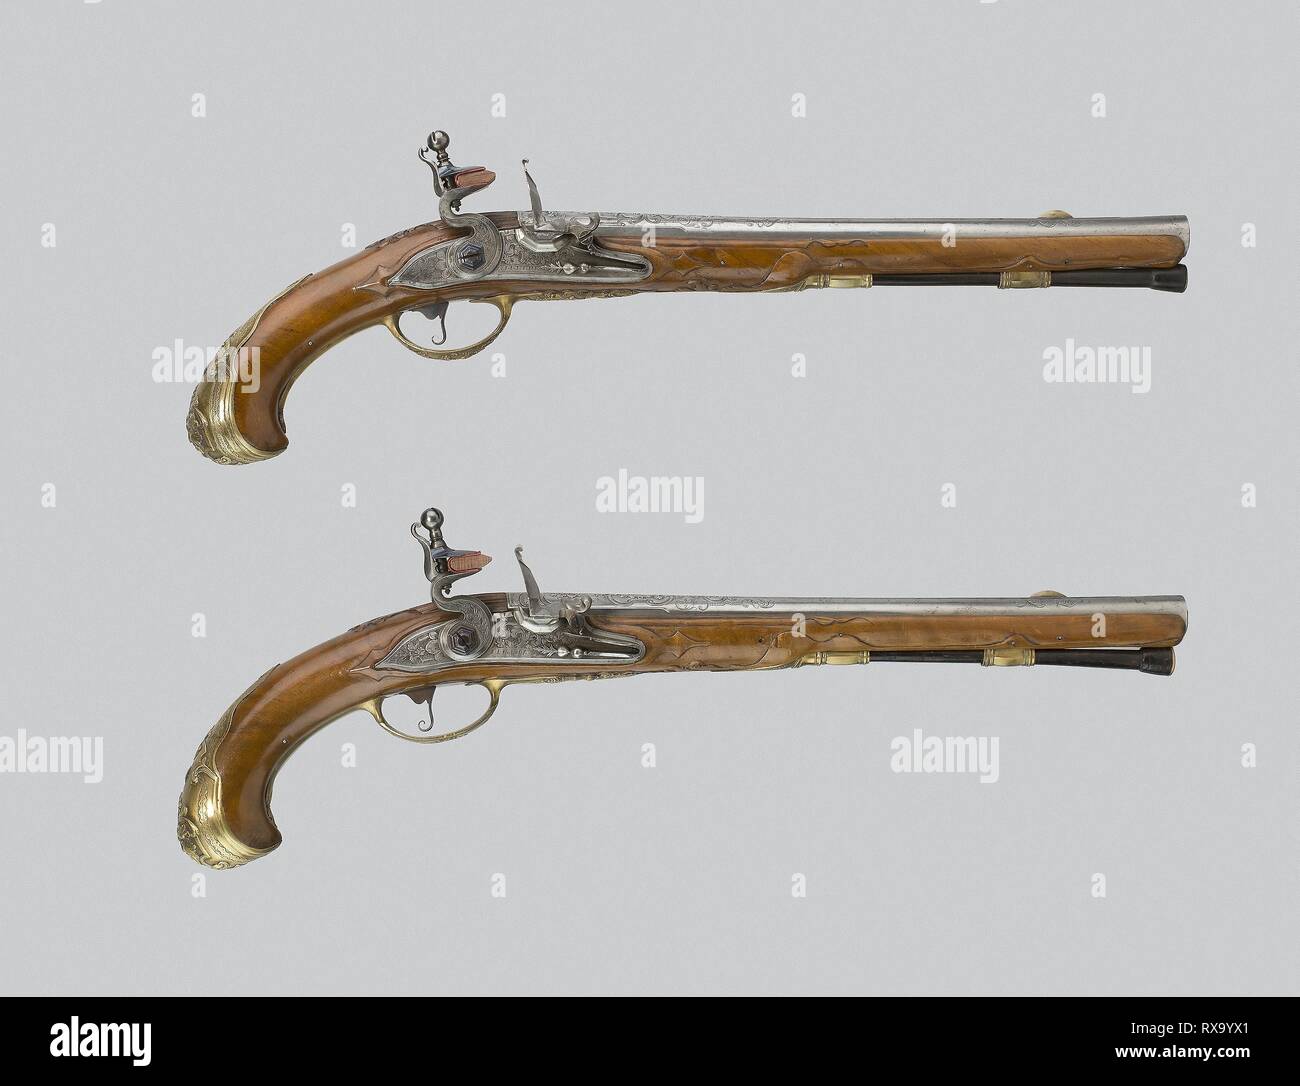 Pair of Flintlock Pistols. Barrels: Johann Jacob Behr; Locks: Johann Jacob Behr; Flemish, Liège, active 1690s-about 1745. Date: 1720-1735. Dimensions: L. 49 cm (19 1/4 in.)  Barrel L. 33 cm (13 in.)  Caliber .66  Wt. 2 lb. 9 oz. each. Walnut, steel, and cast and chased brass. Origin: Germany. Museum: The Chicago Art Institute. Author: J. J. Behr. Stock Photo